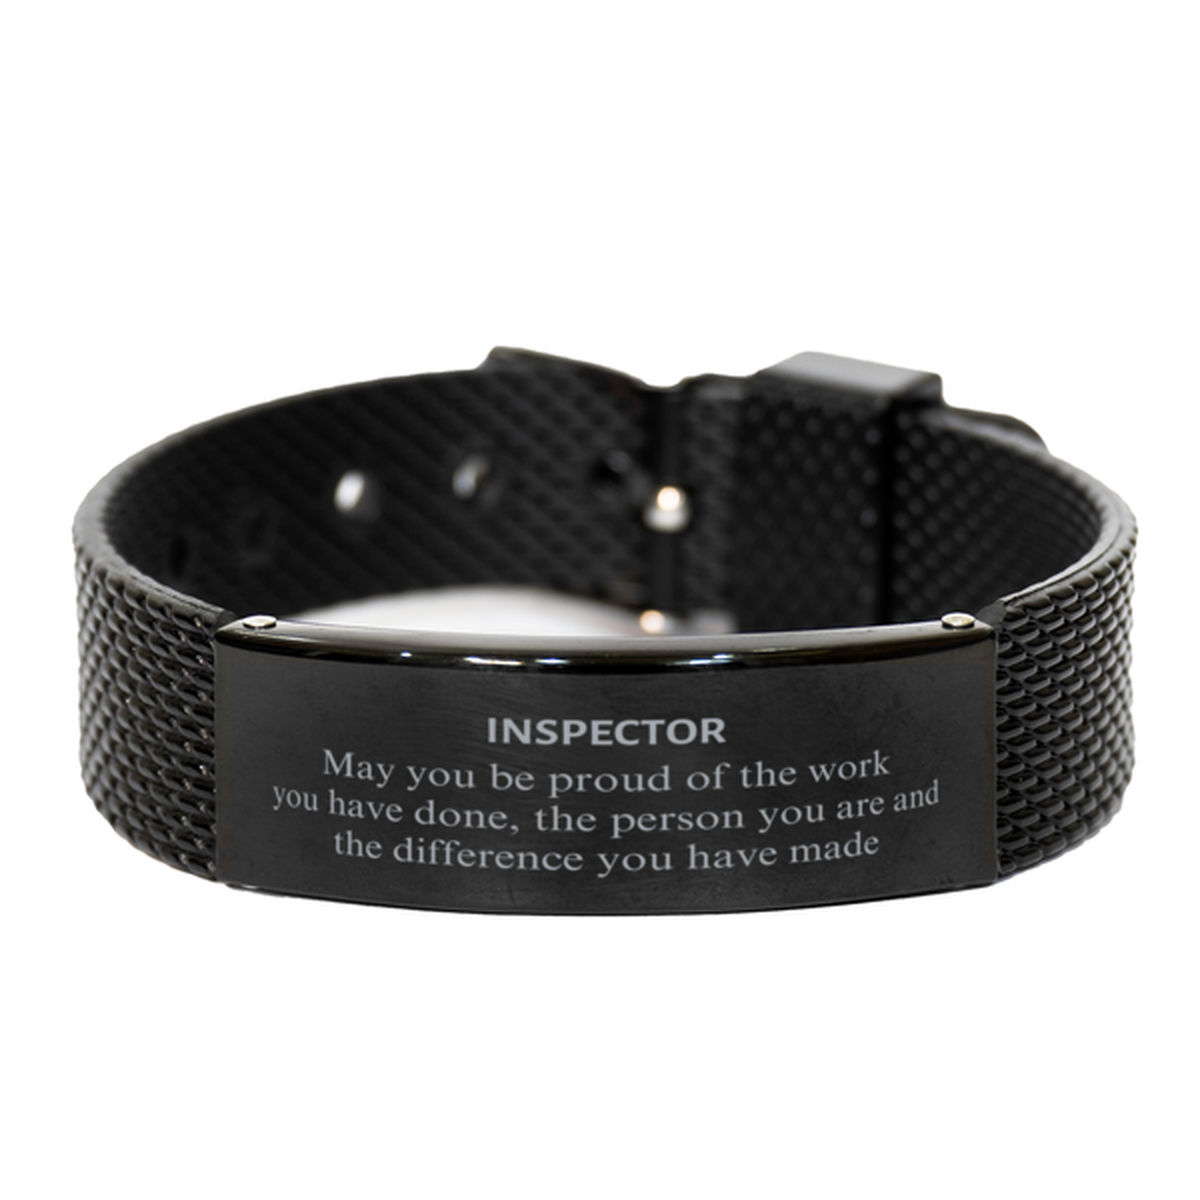 Inspector May you be proud of the work you have done, Retirement Inspector Black Shark Mesh Bracelet for Colleague Appreciation Gifts Amazing for Inspector